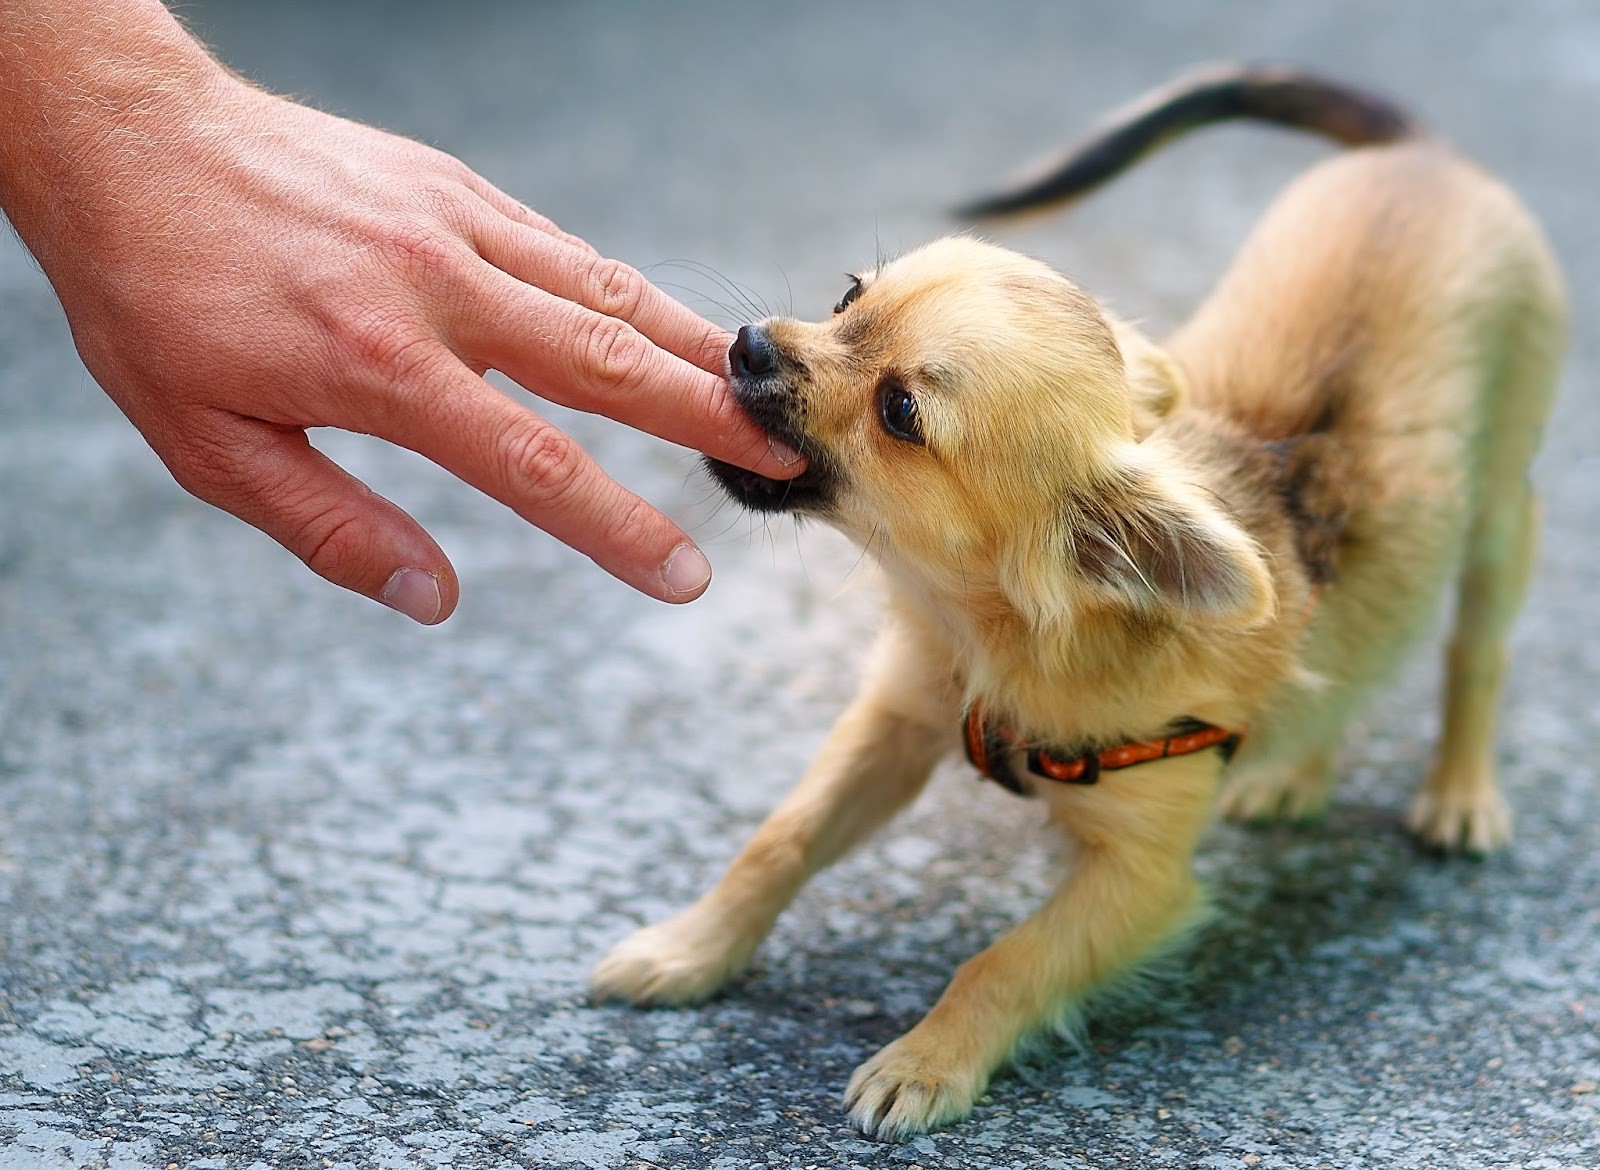 Chihuahua puppy biting a man’s hand on a blurred background